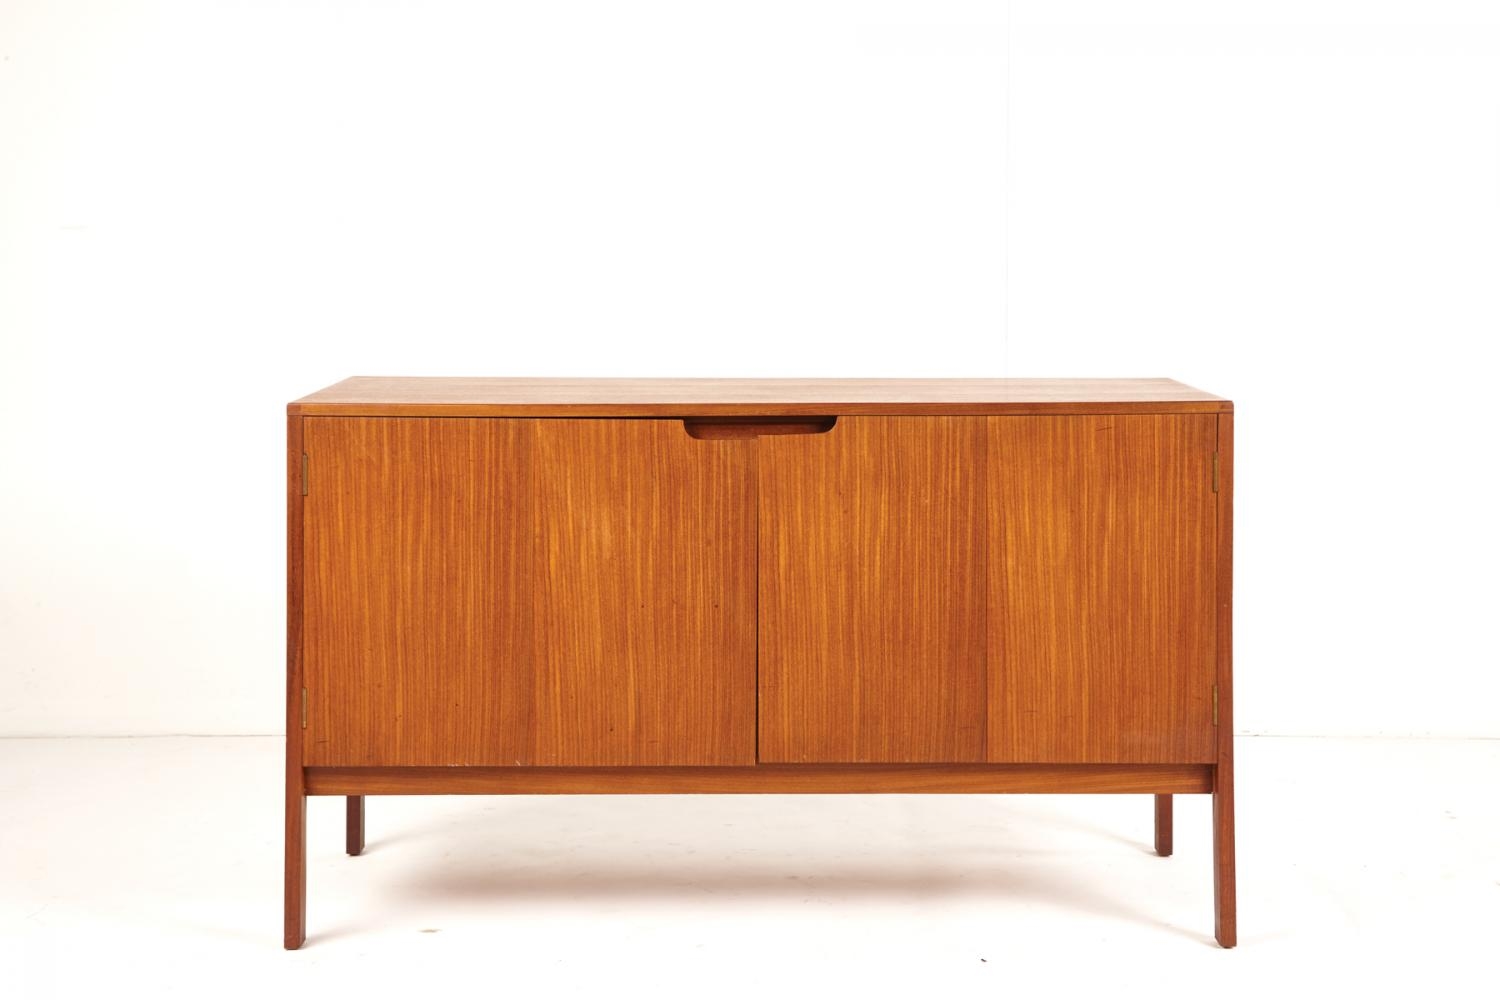 A  Afromosia  Sideboard by Richard Hornby, circa 1960